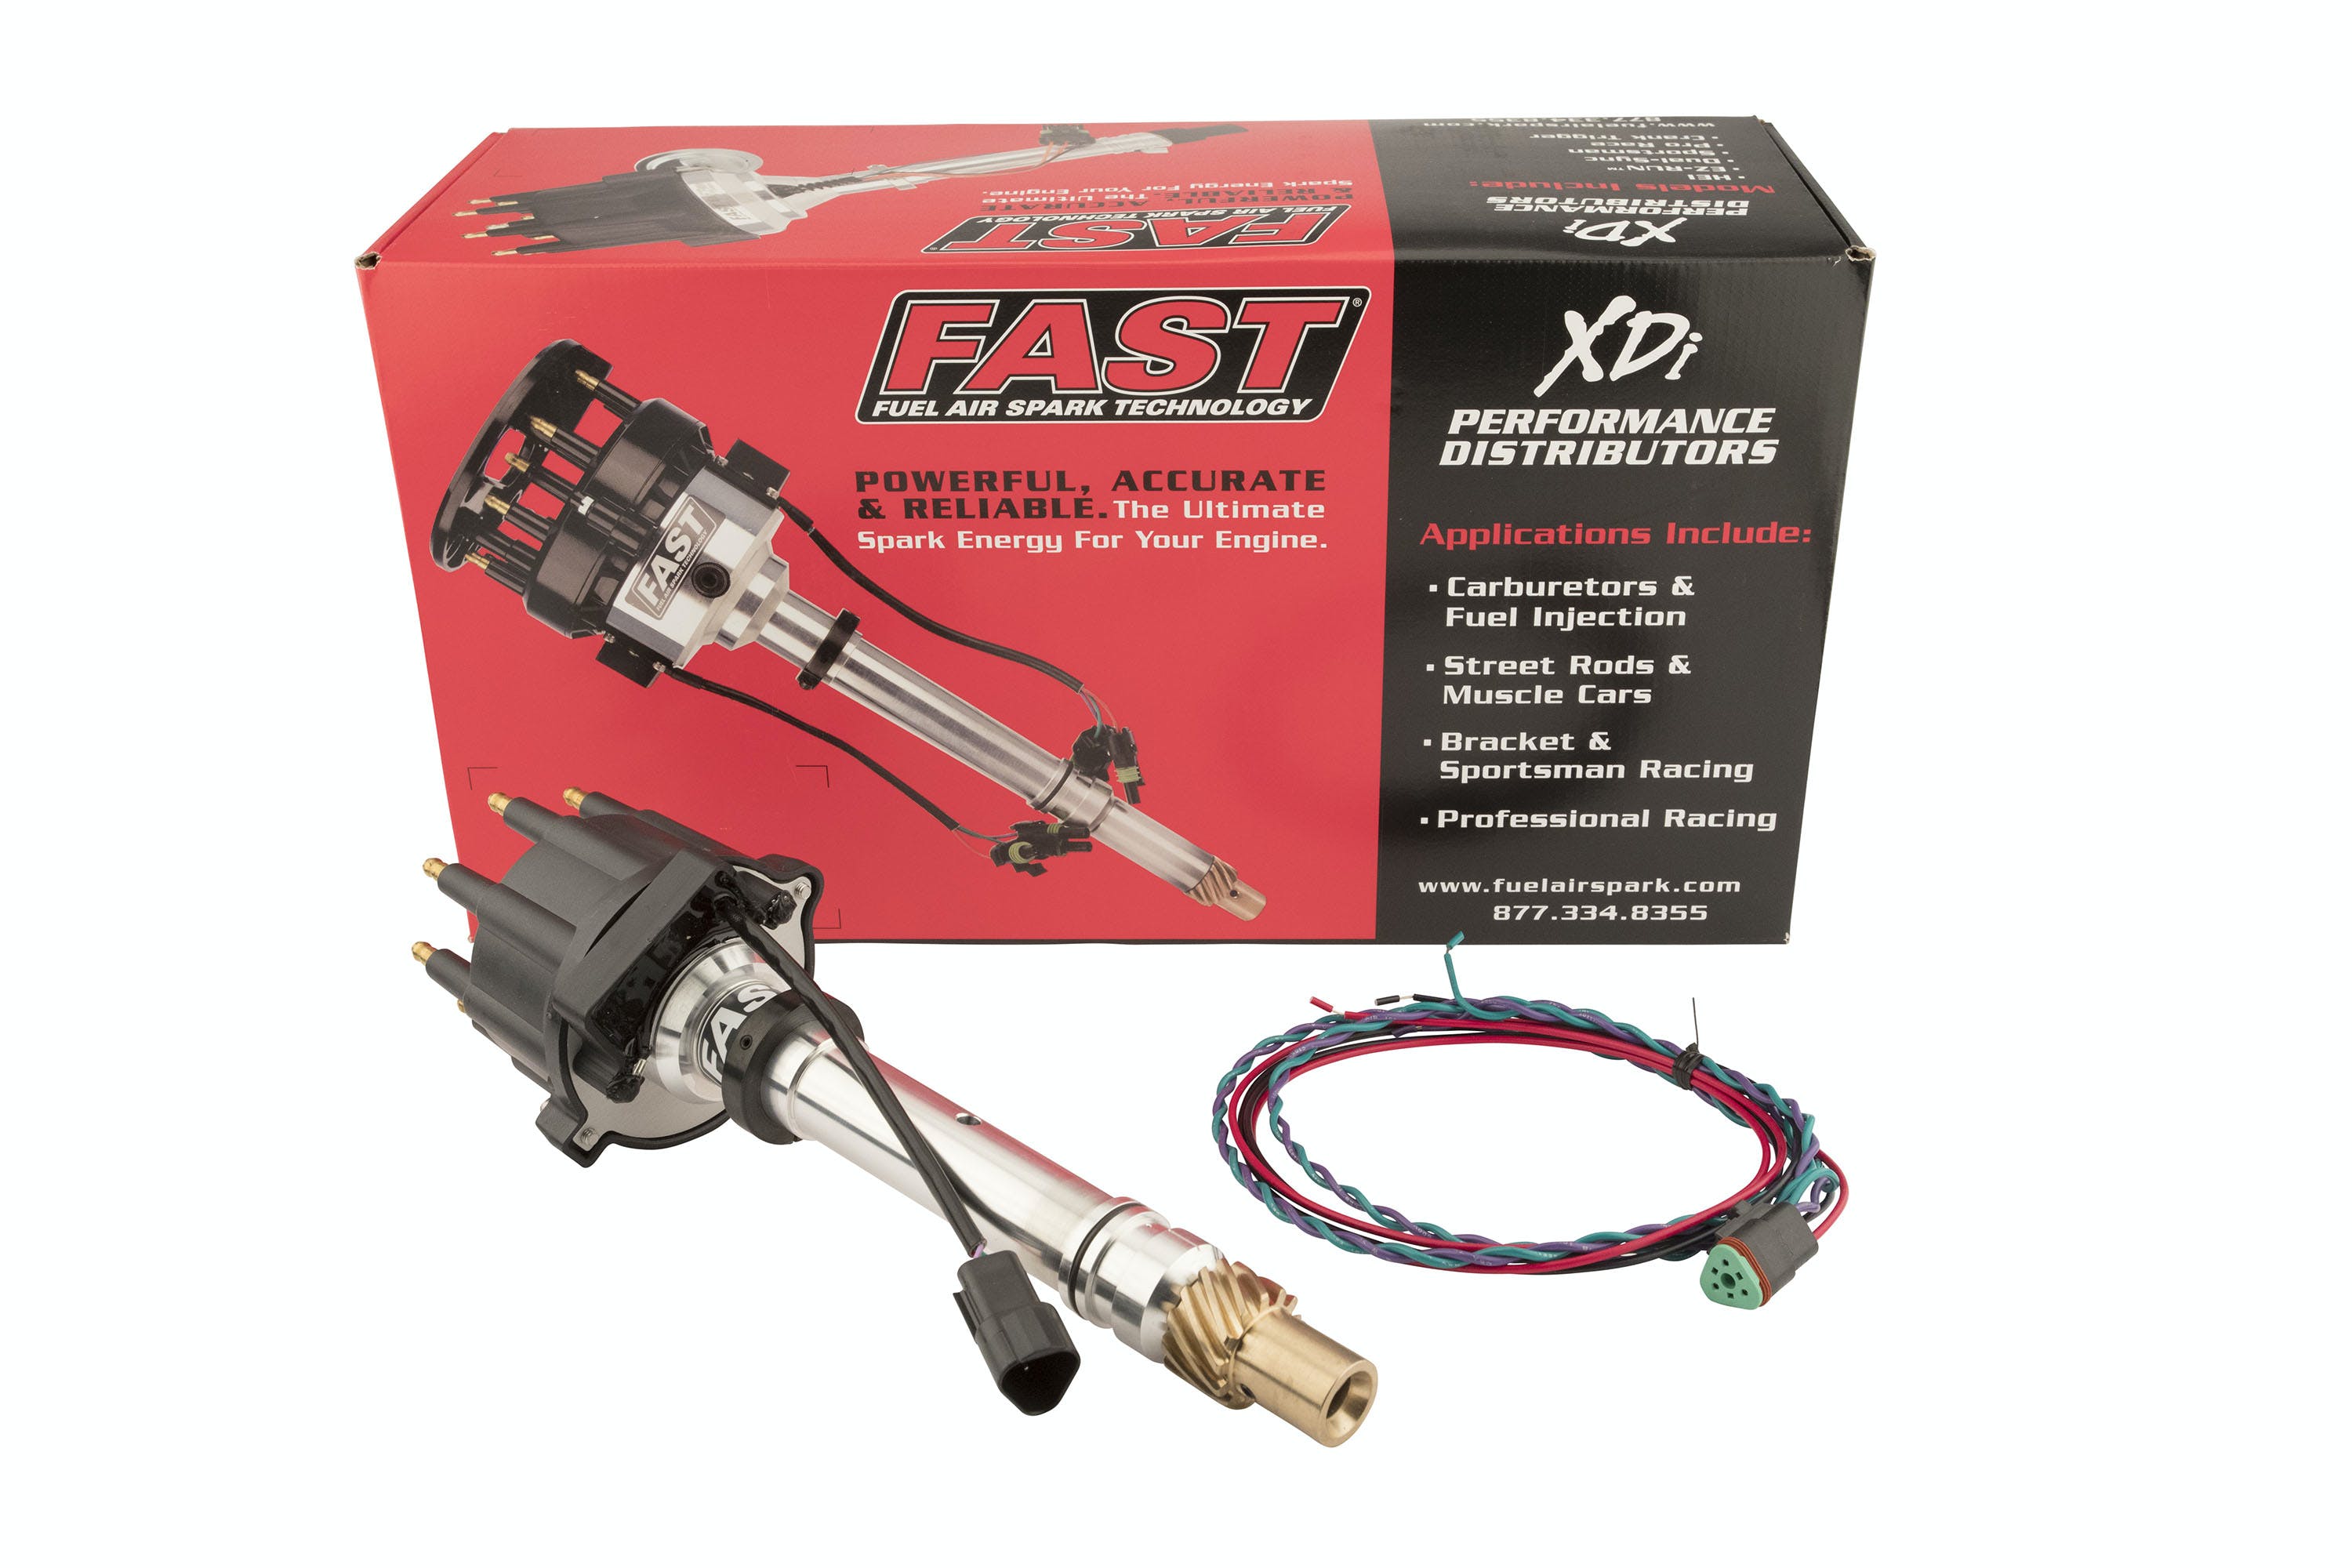 FAST - Fuel Air Spark Technology 1000-1511EFI XDi Race EFI Distributor for Chevrolet Small Block and Big Block w/ Small Cap